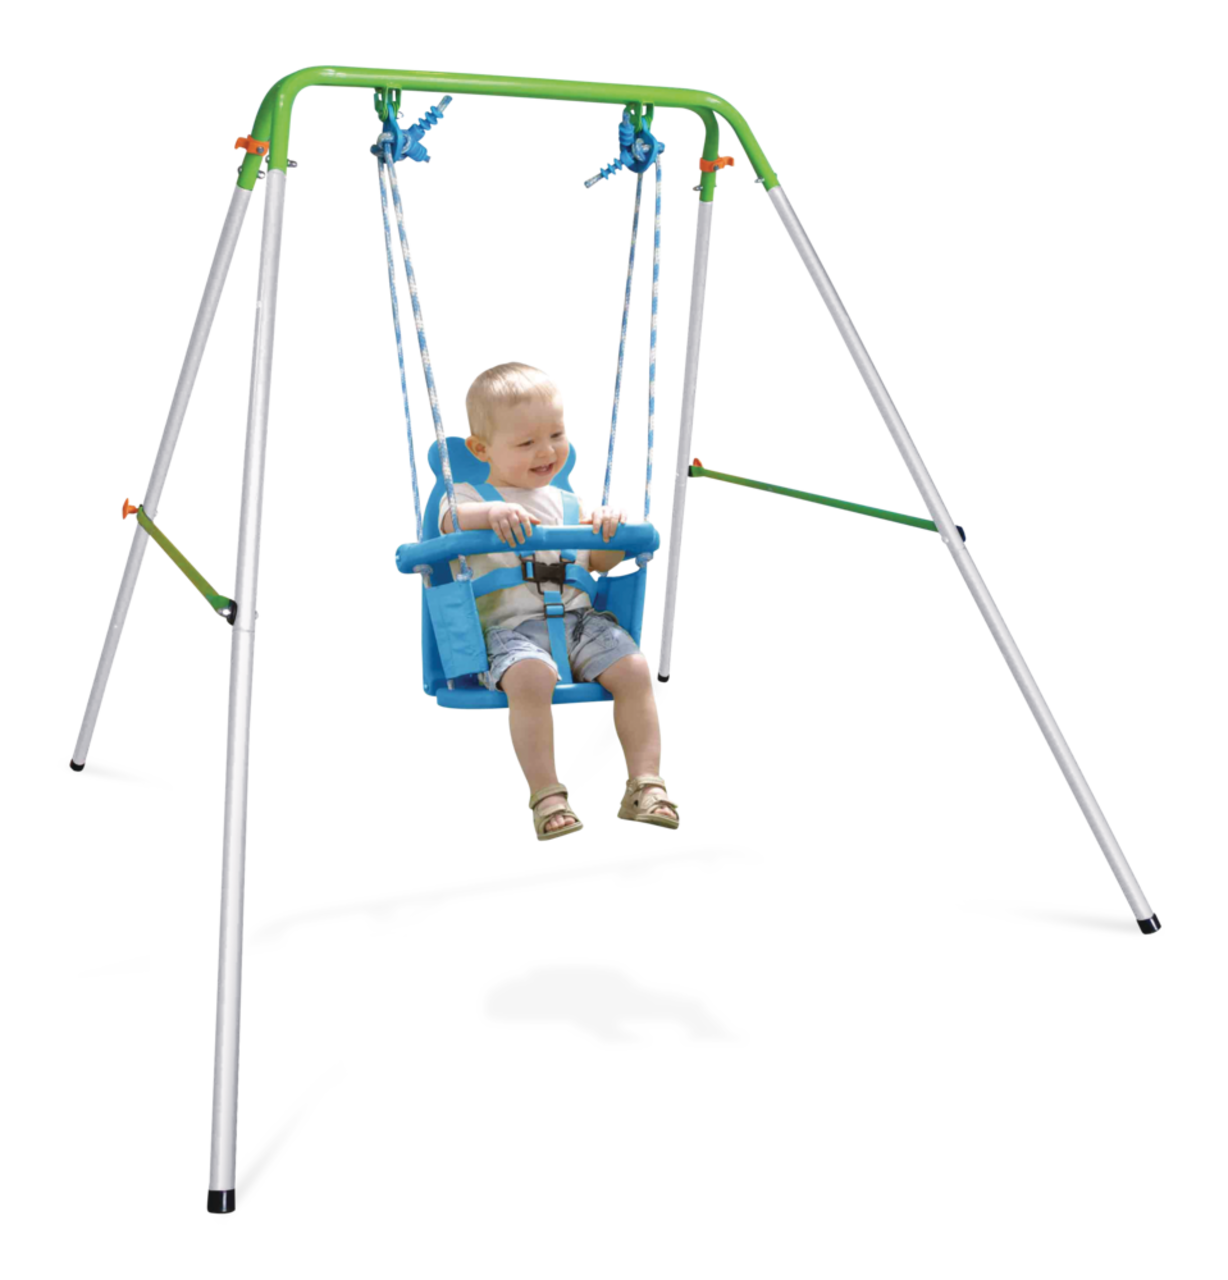 Sportspower Outdoor Foldable Metal/Steel Swing Set, Ages 12-36 Months, up  to 55lbs